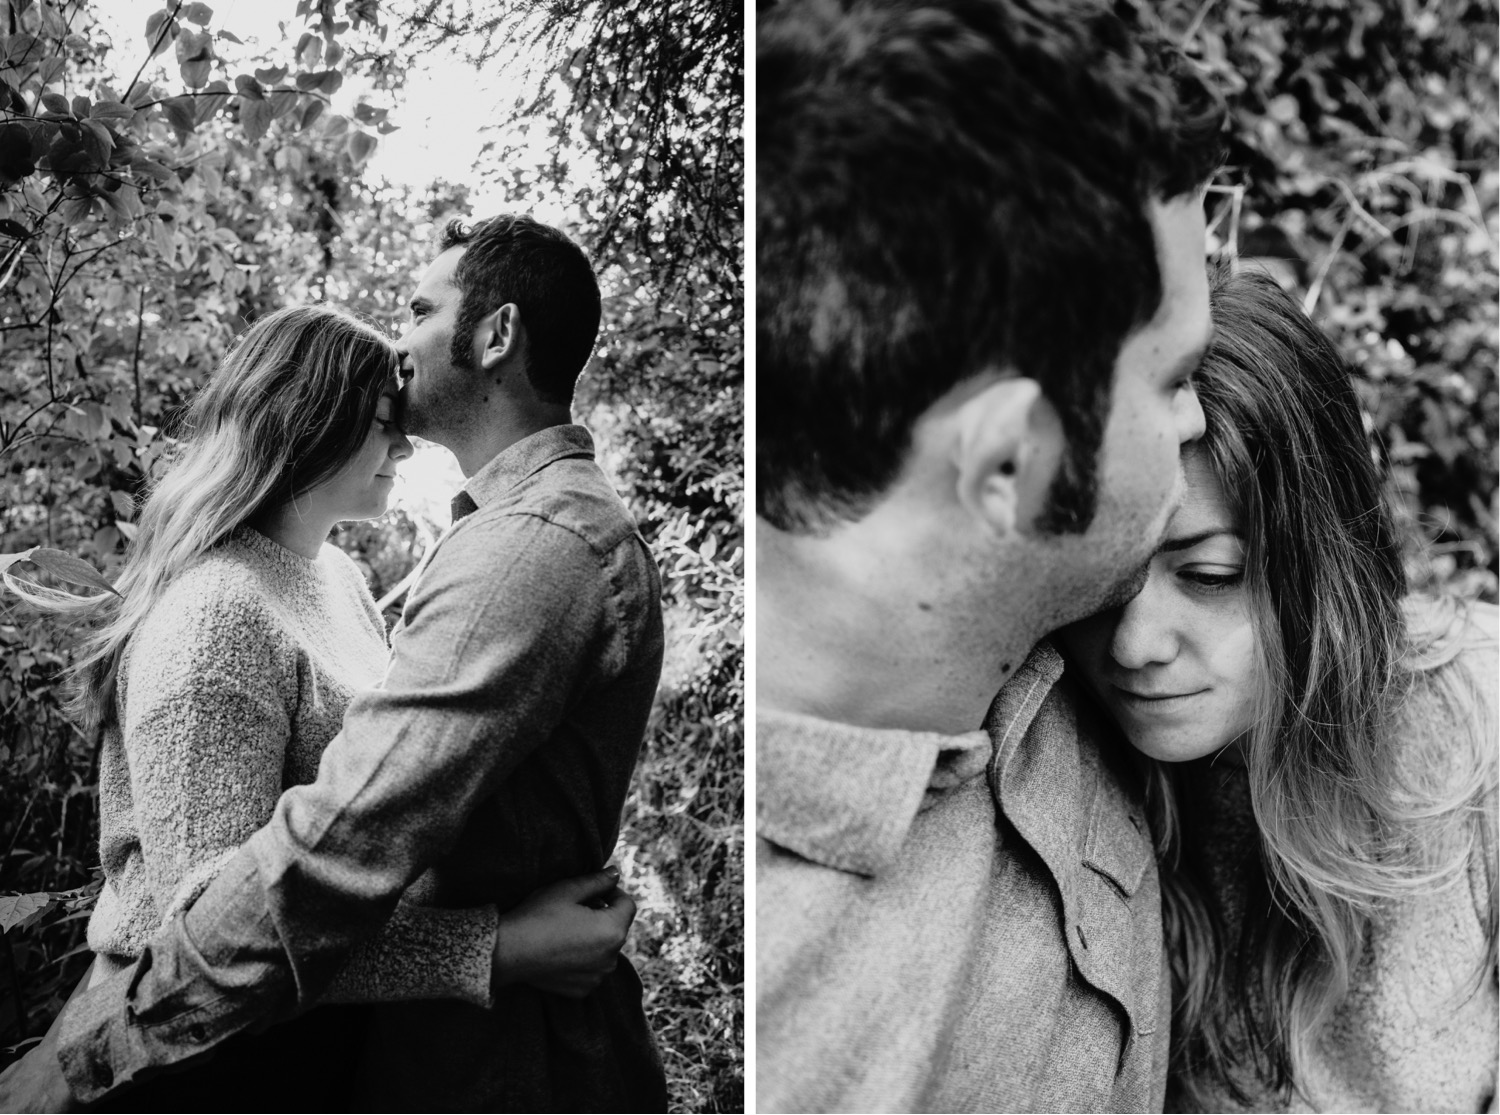 Two black and white images of a couple's Big Sur engagement photoshoot. In one photo the couple embraces and the man kisses his fiance's forehead. In the second photo the woman rests her head on her fiance's shoulder and he kisses her forehead.